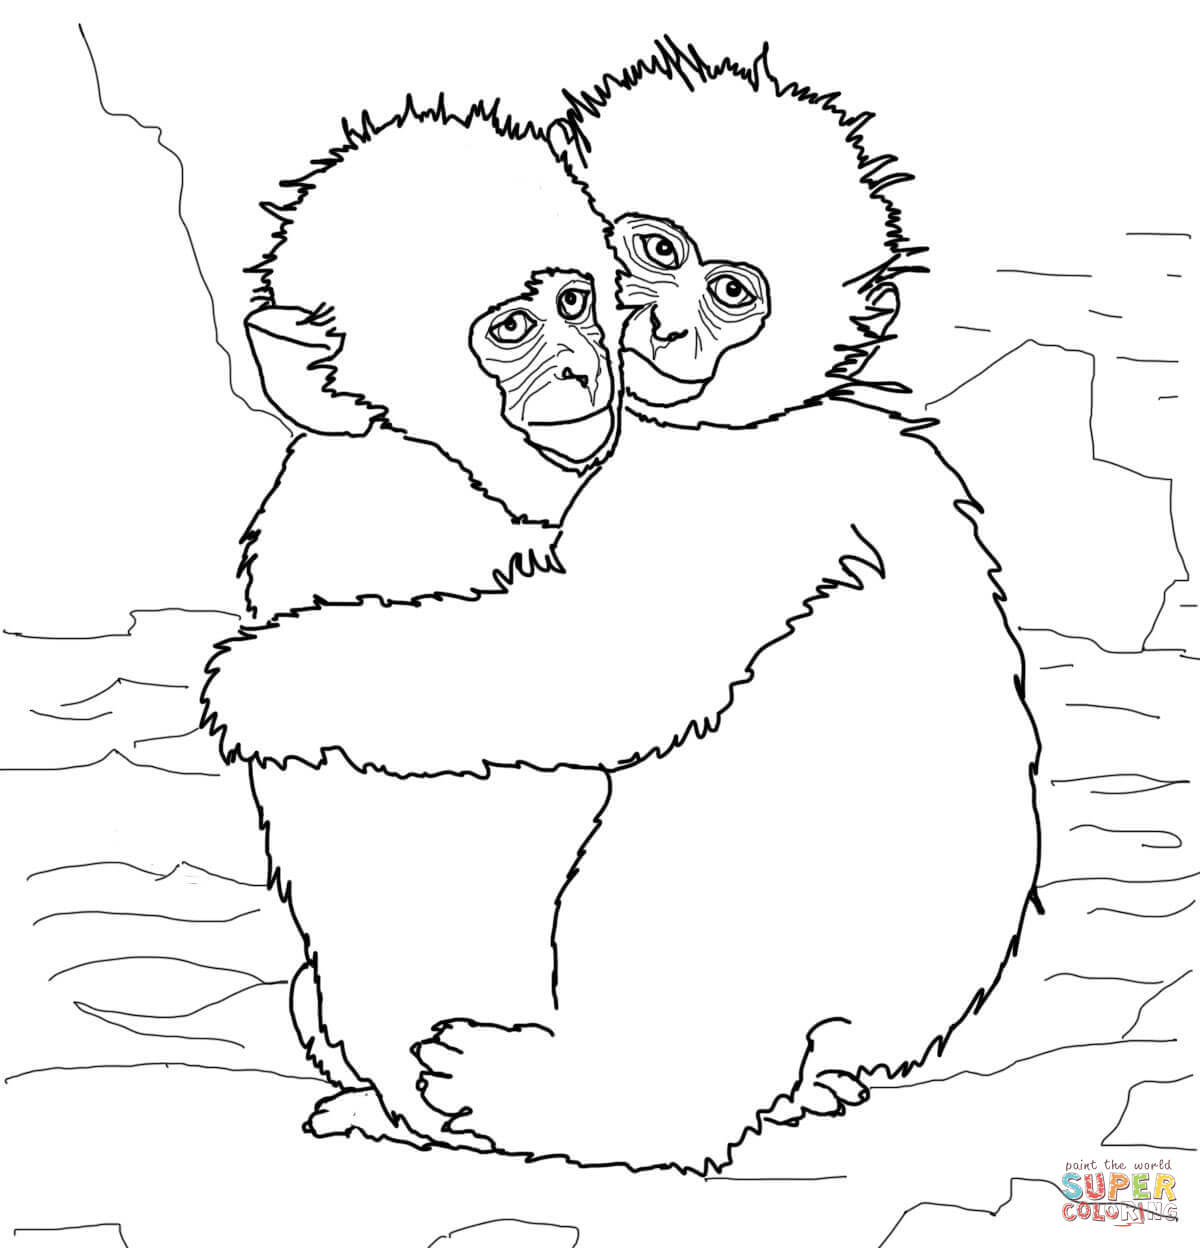 Snow Monkey coloring #18, Download drawings